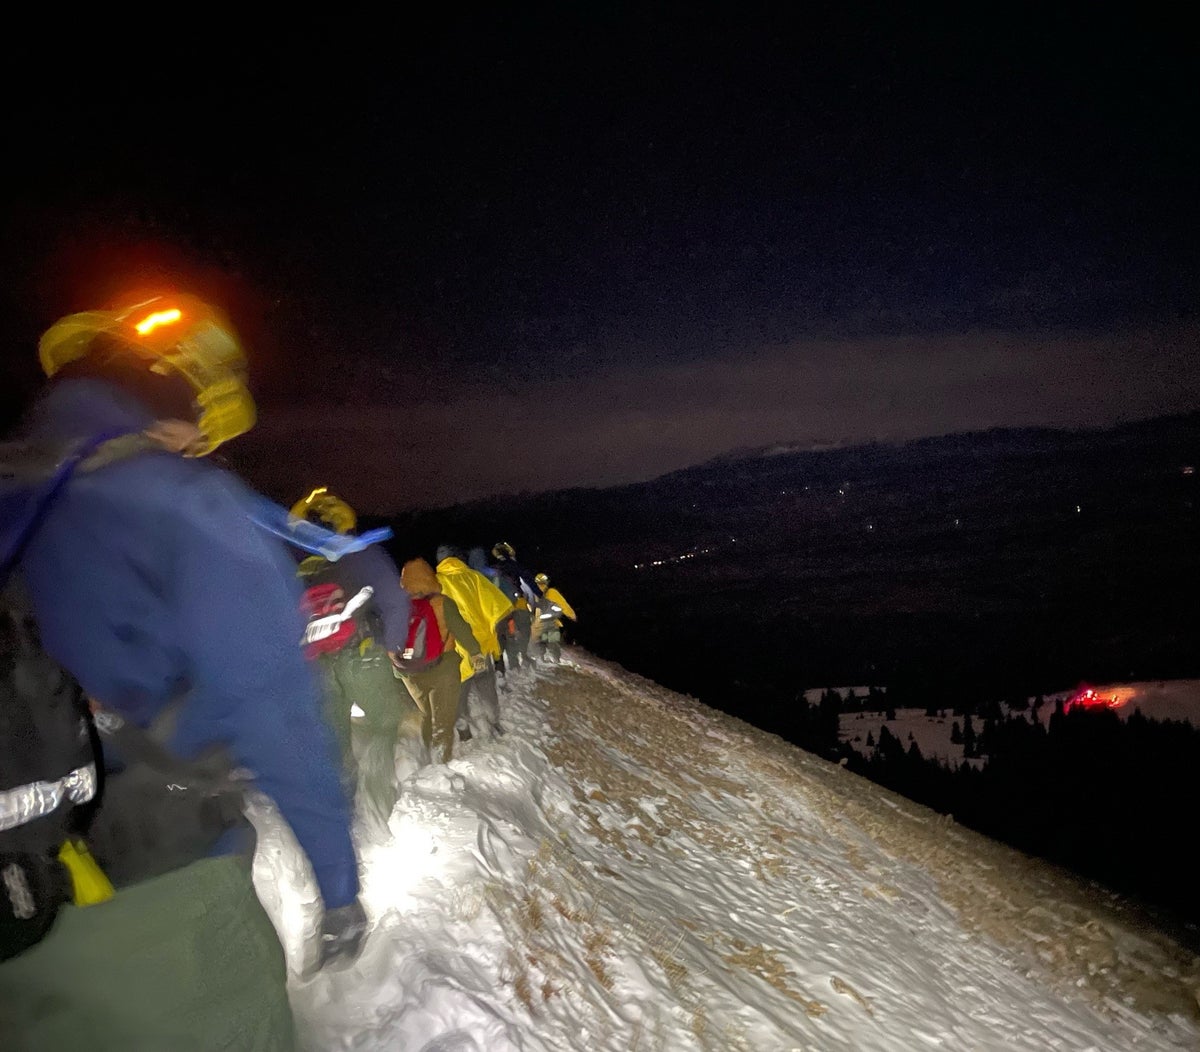 Stranded family of five dramatically rescued from icy Colorado mountain